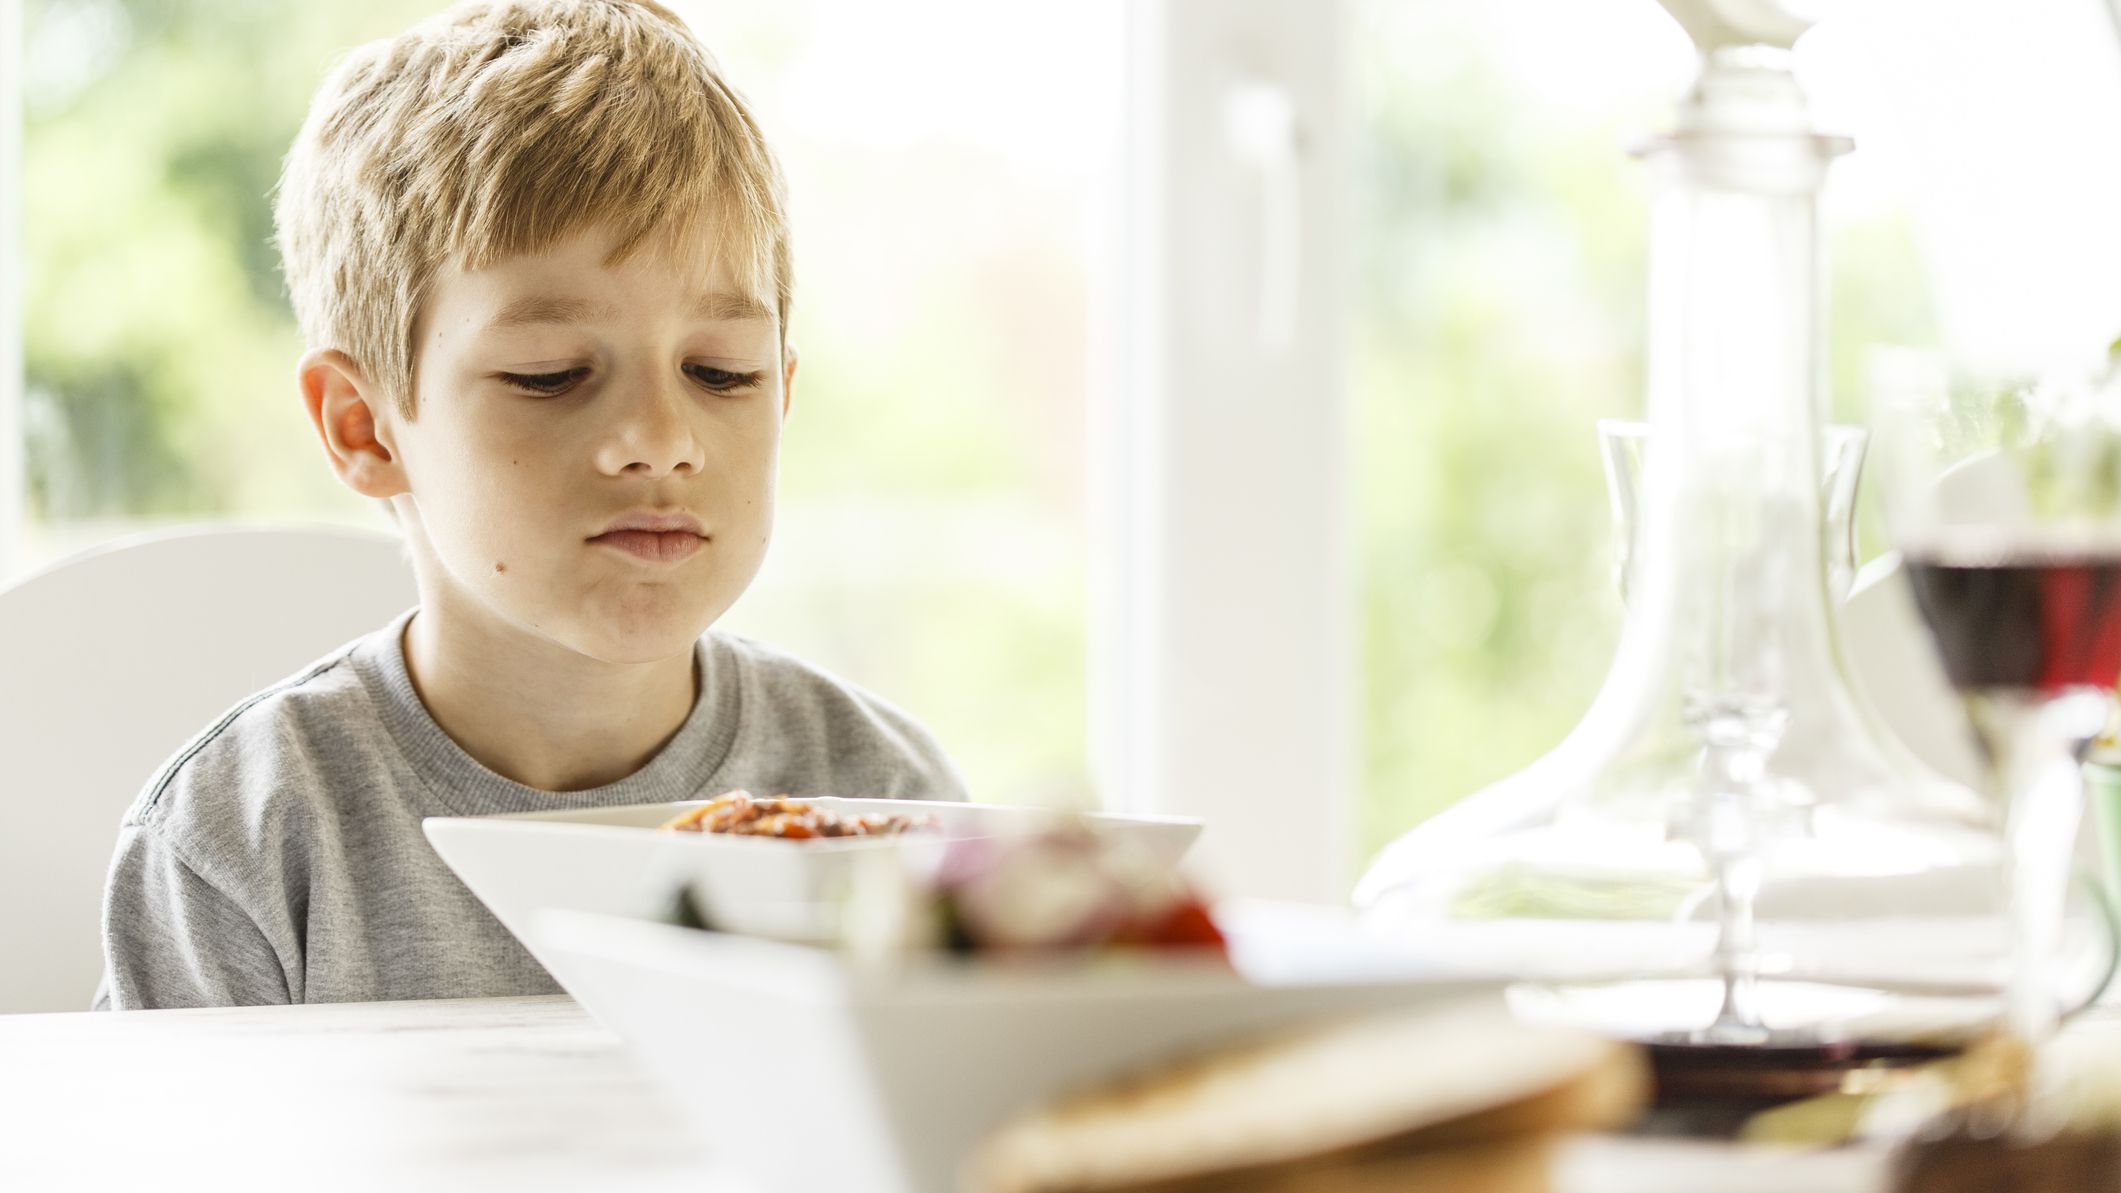 Tips to End Mealtime Stress in Children